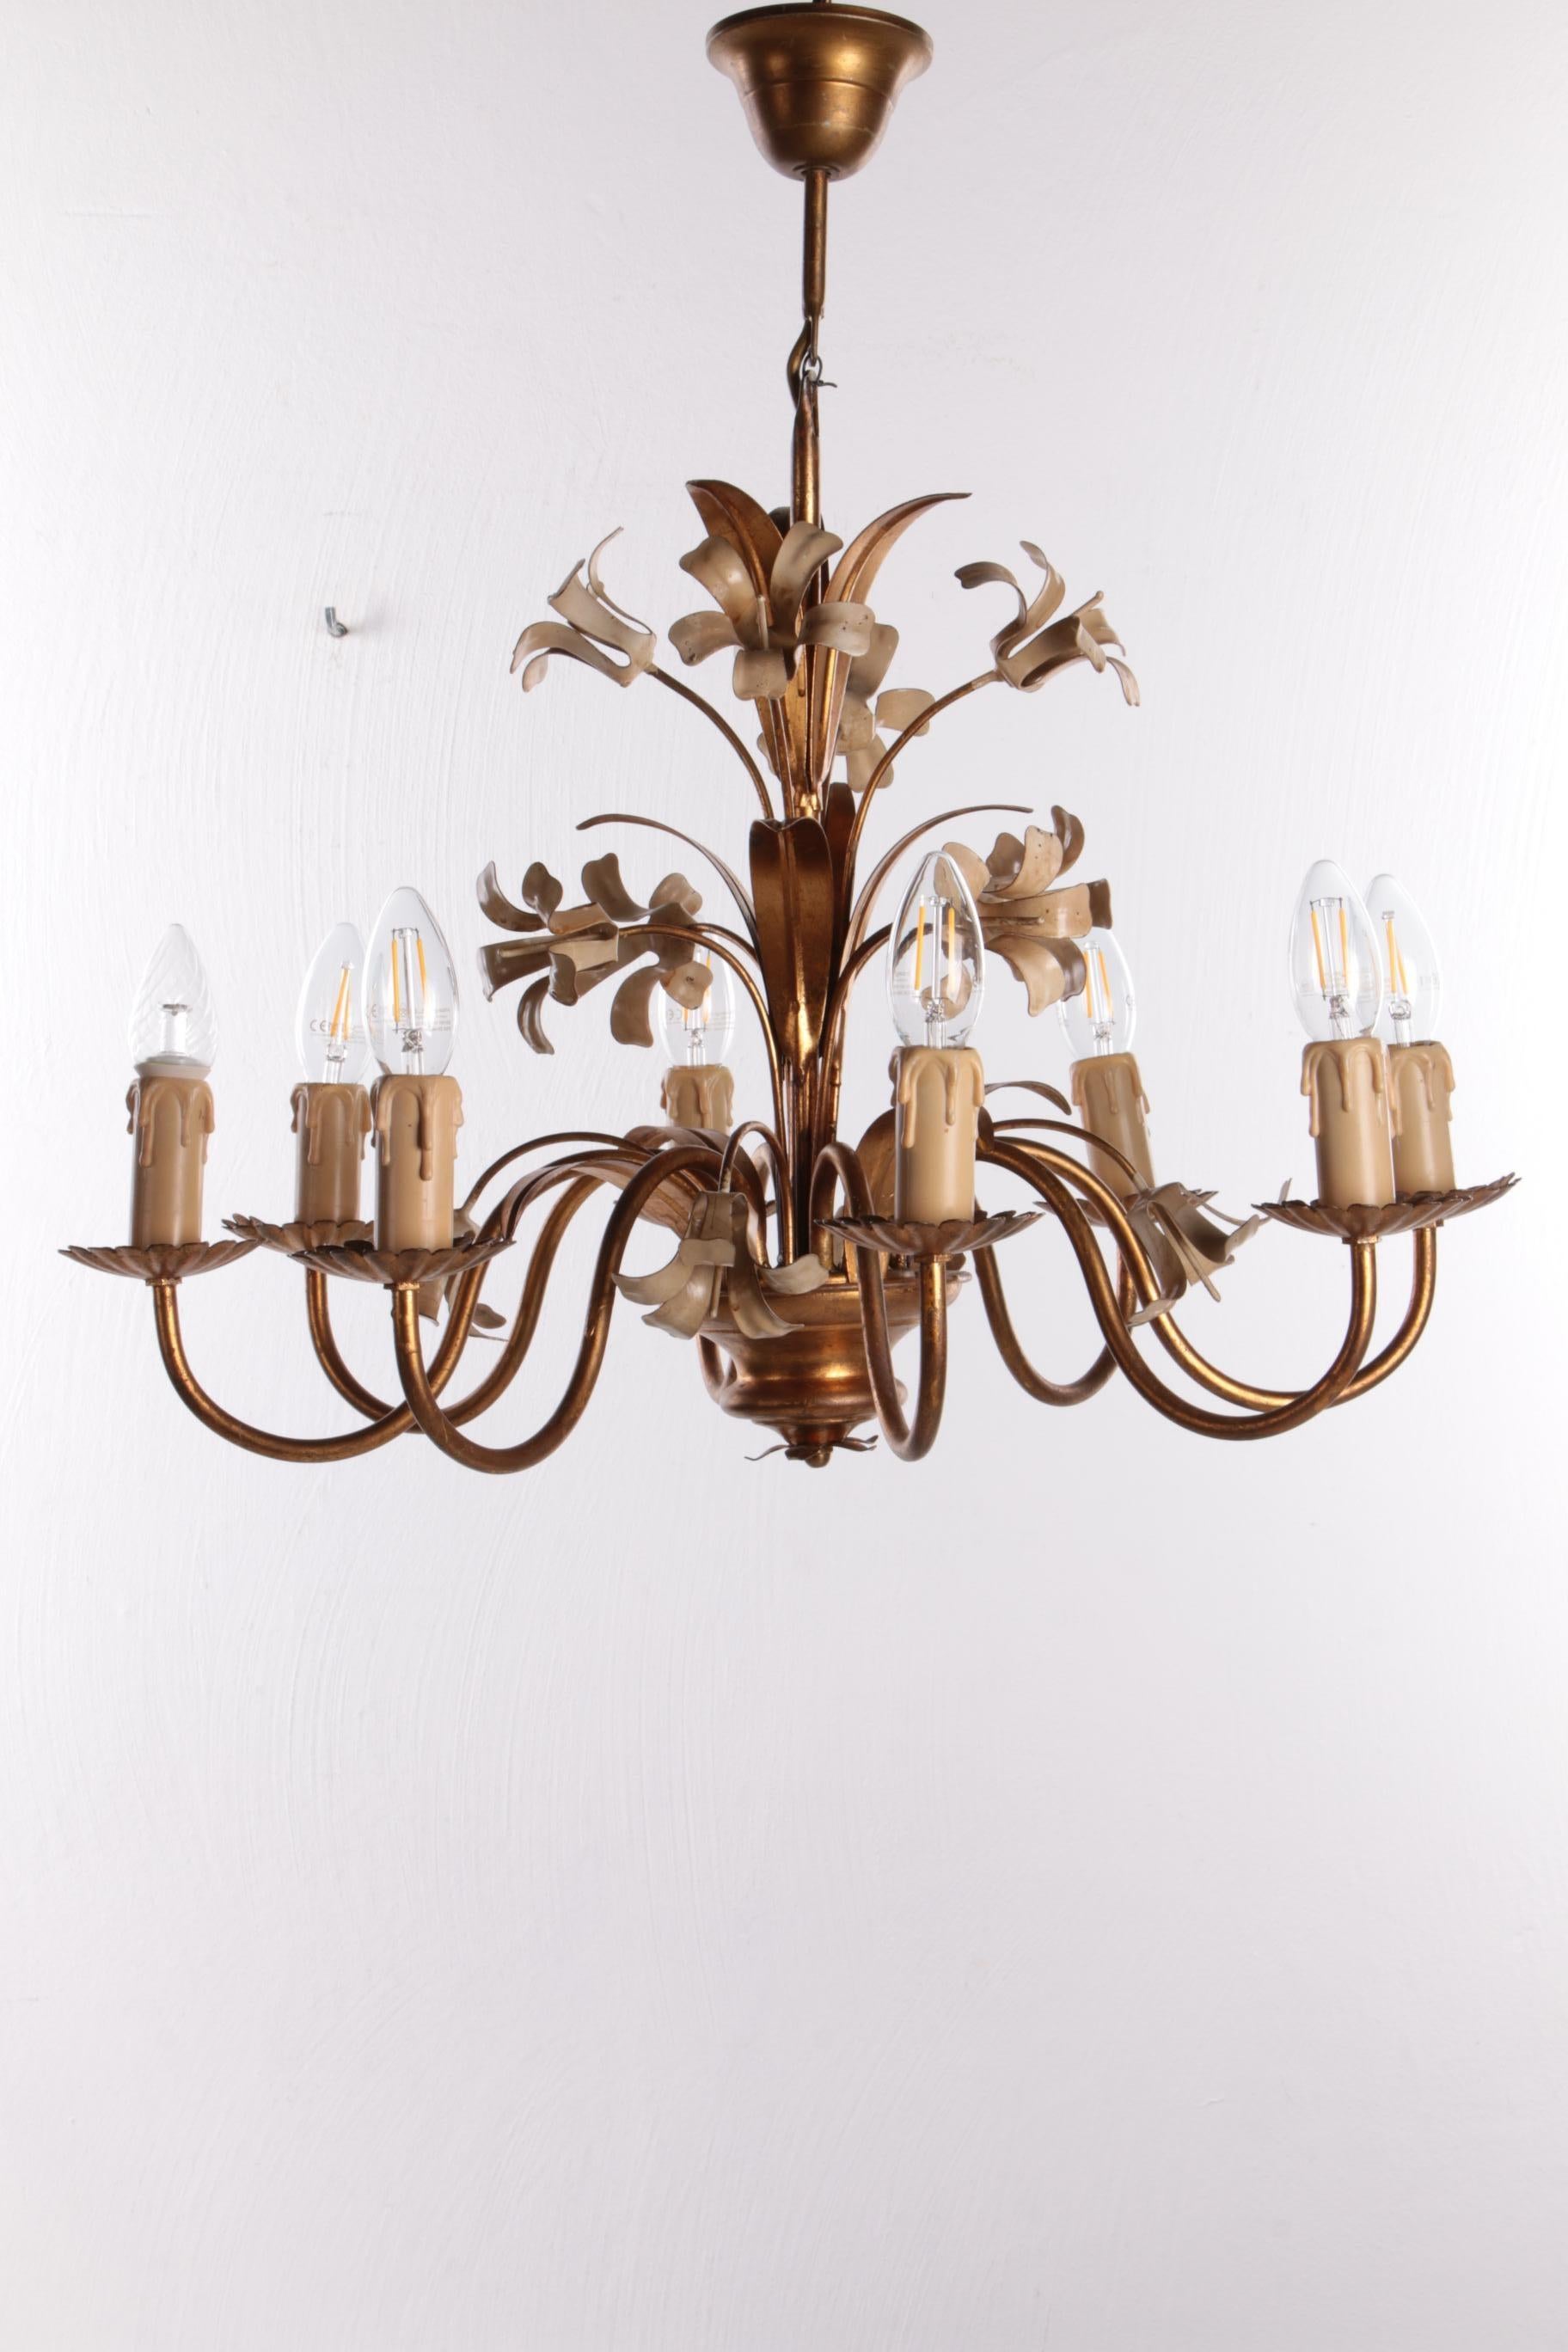 Italian Hollywood Regency chandelier 1960s


The chandelier is made of lacquered and gilded metal and is decorated with leaves and flowers.

This stately lamp fits perfectly in a Hollywood Regency style interior.

The chandelier is